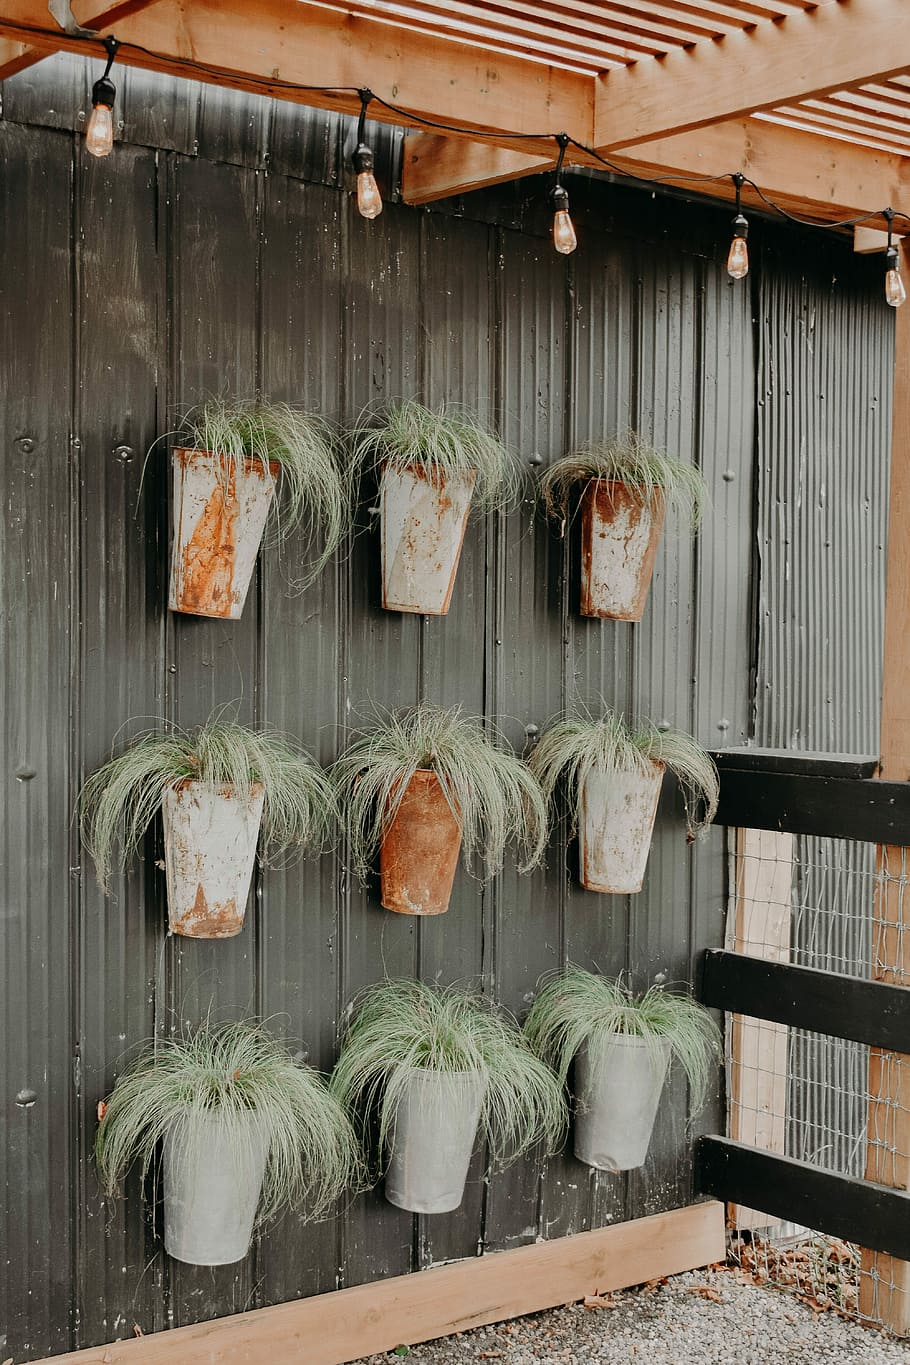 nine gray pots, green potted plants hanging on wall, fence, garden